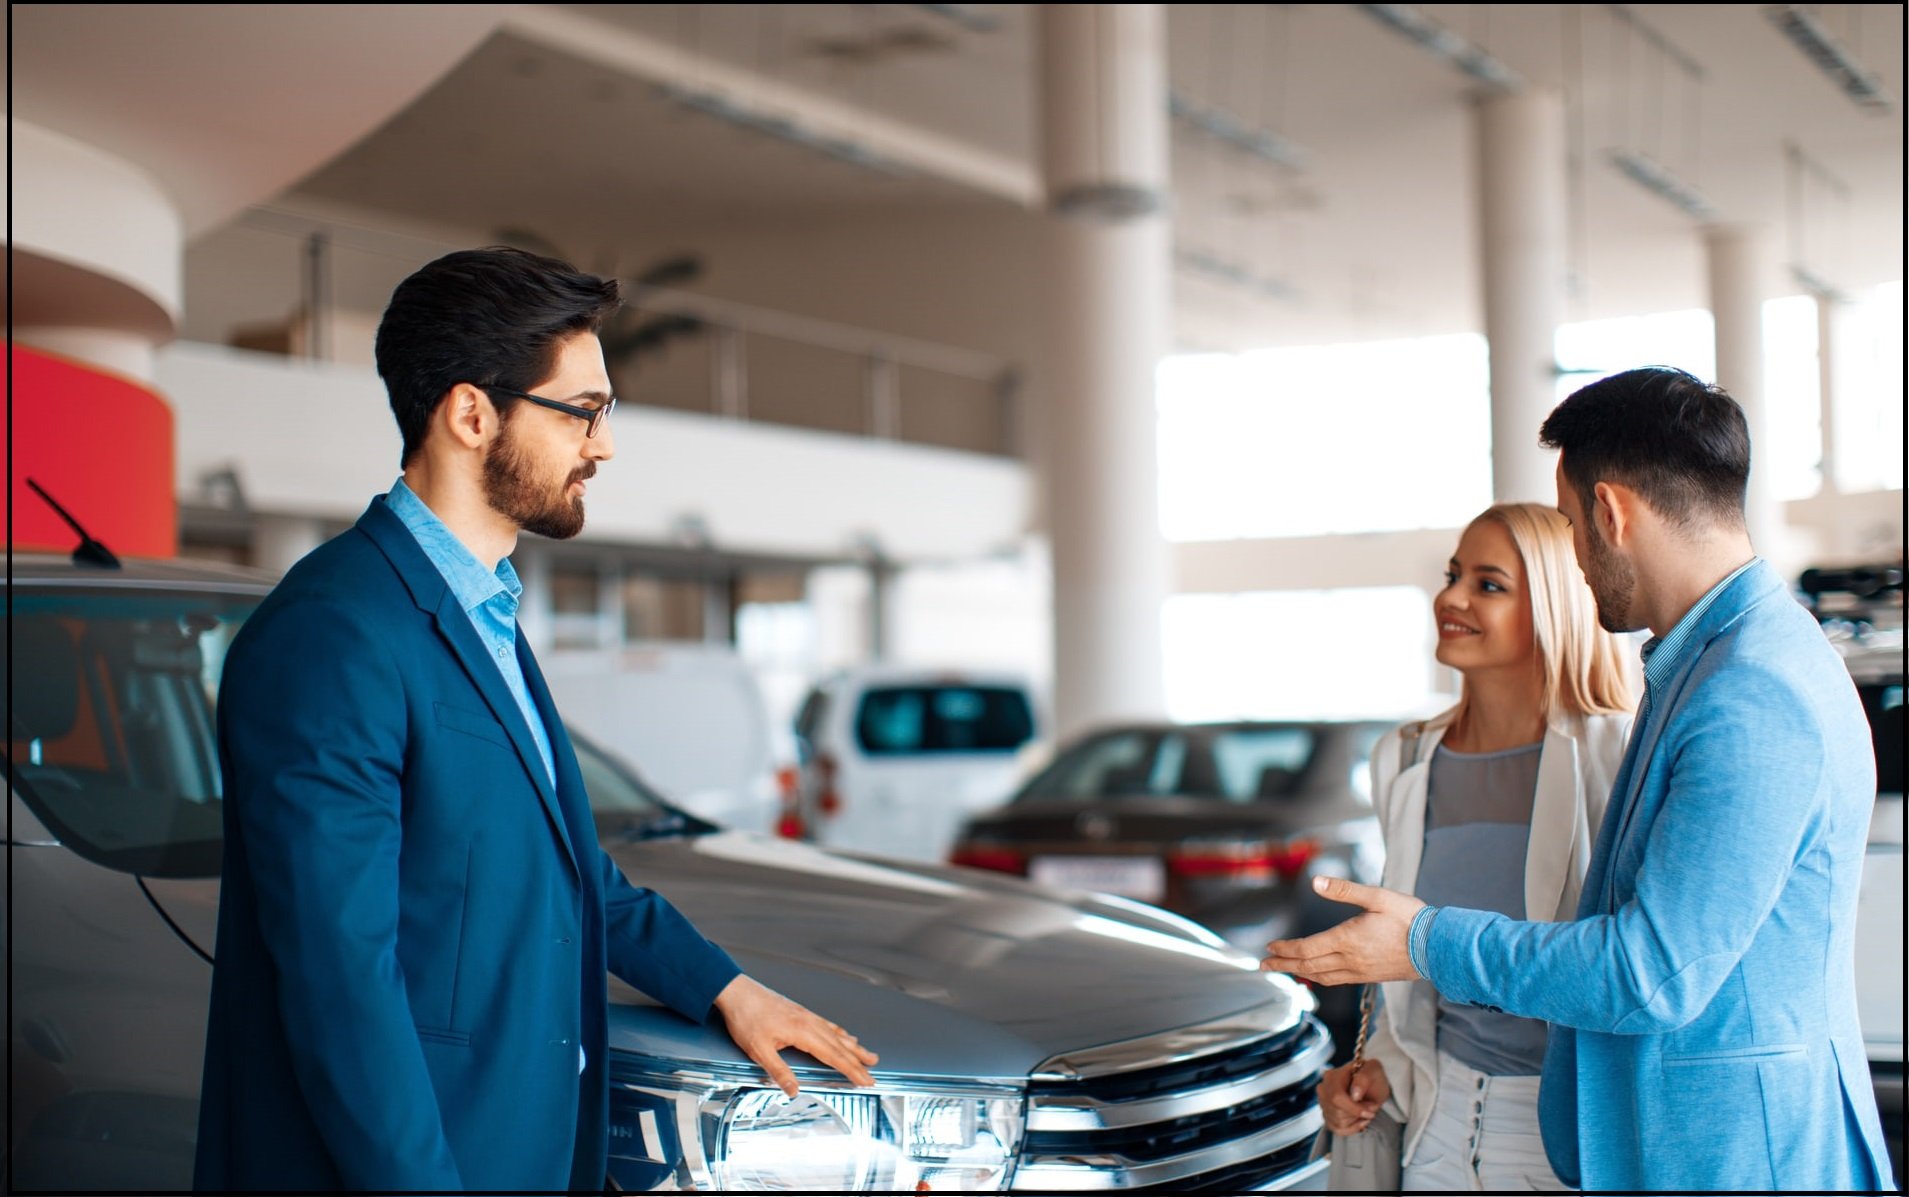 How to Get a Good Deal on Used Car?